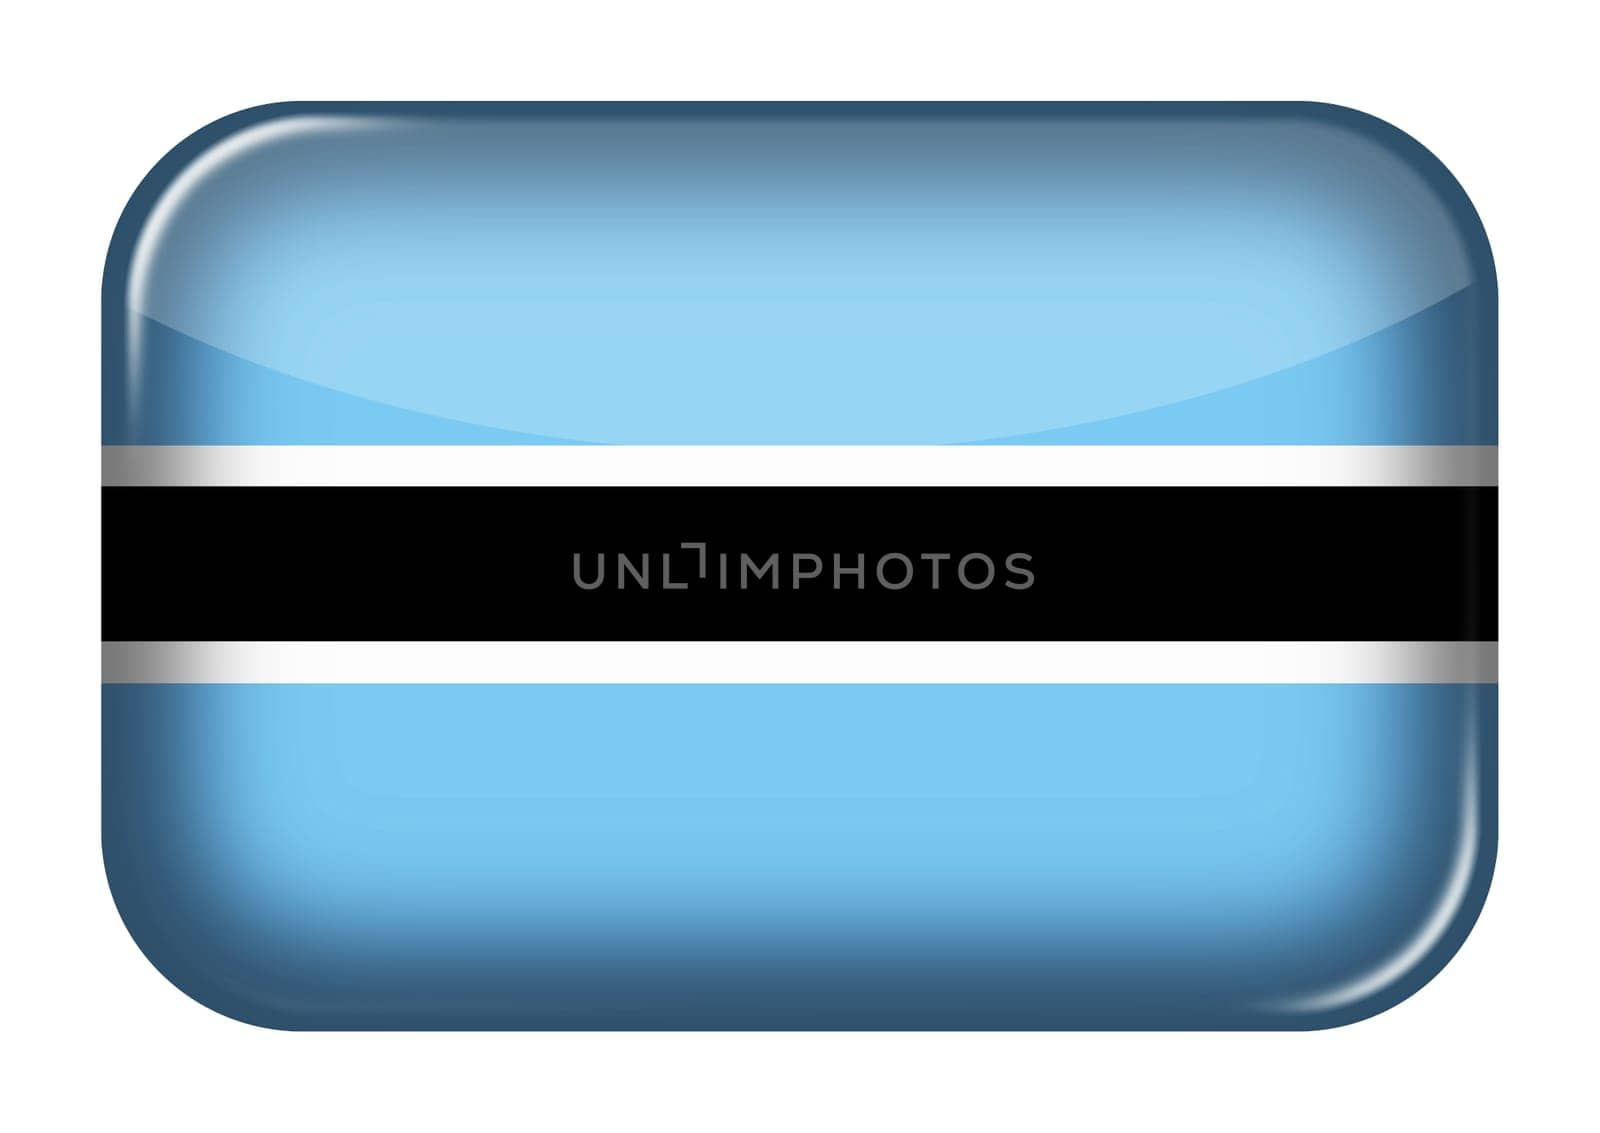 A Botswana web icon rectangle button with clipping path